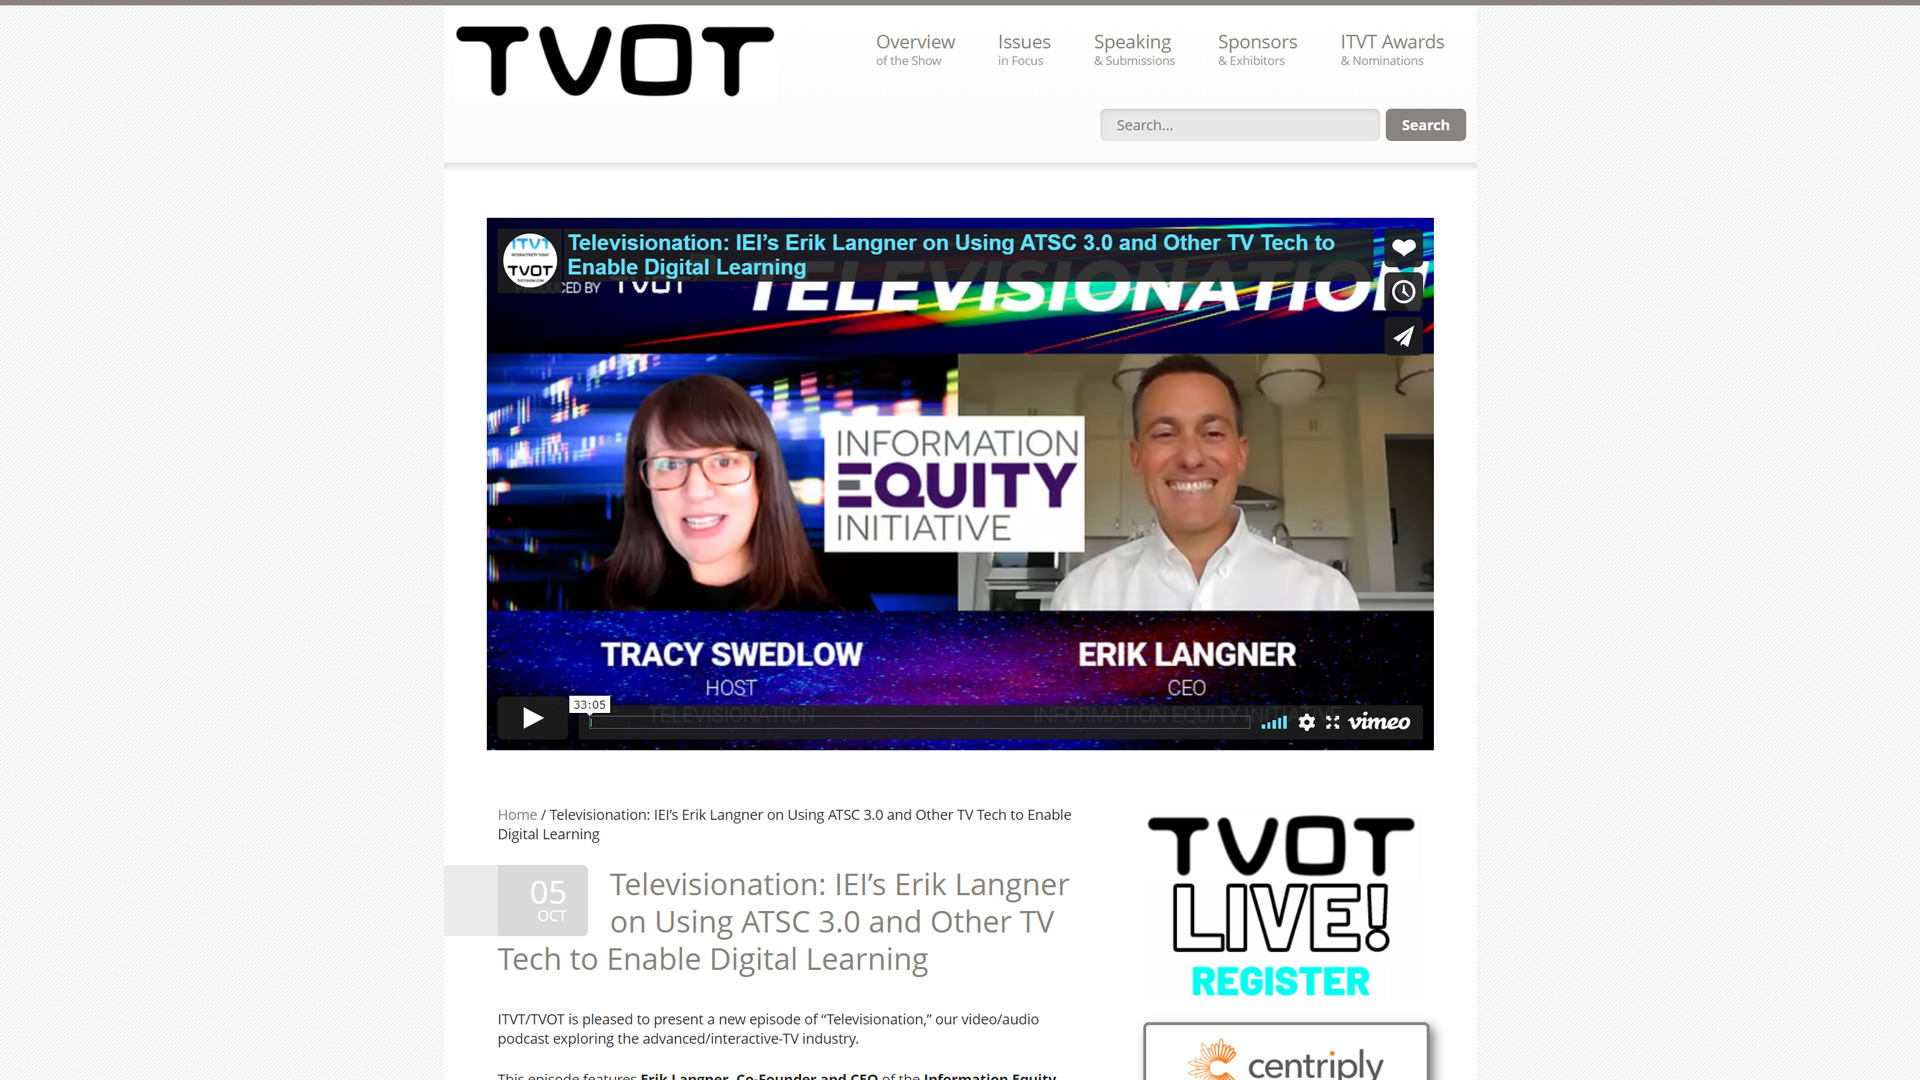 Televisionation: IEI’s Erik Langner on Using ATSC 3.0 and Other TV Tech to Enable Digital Learning